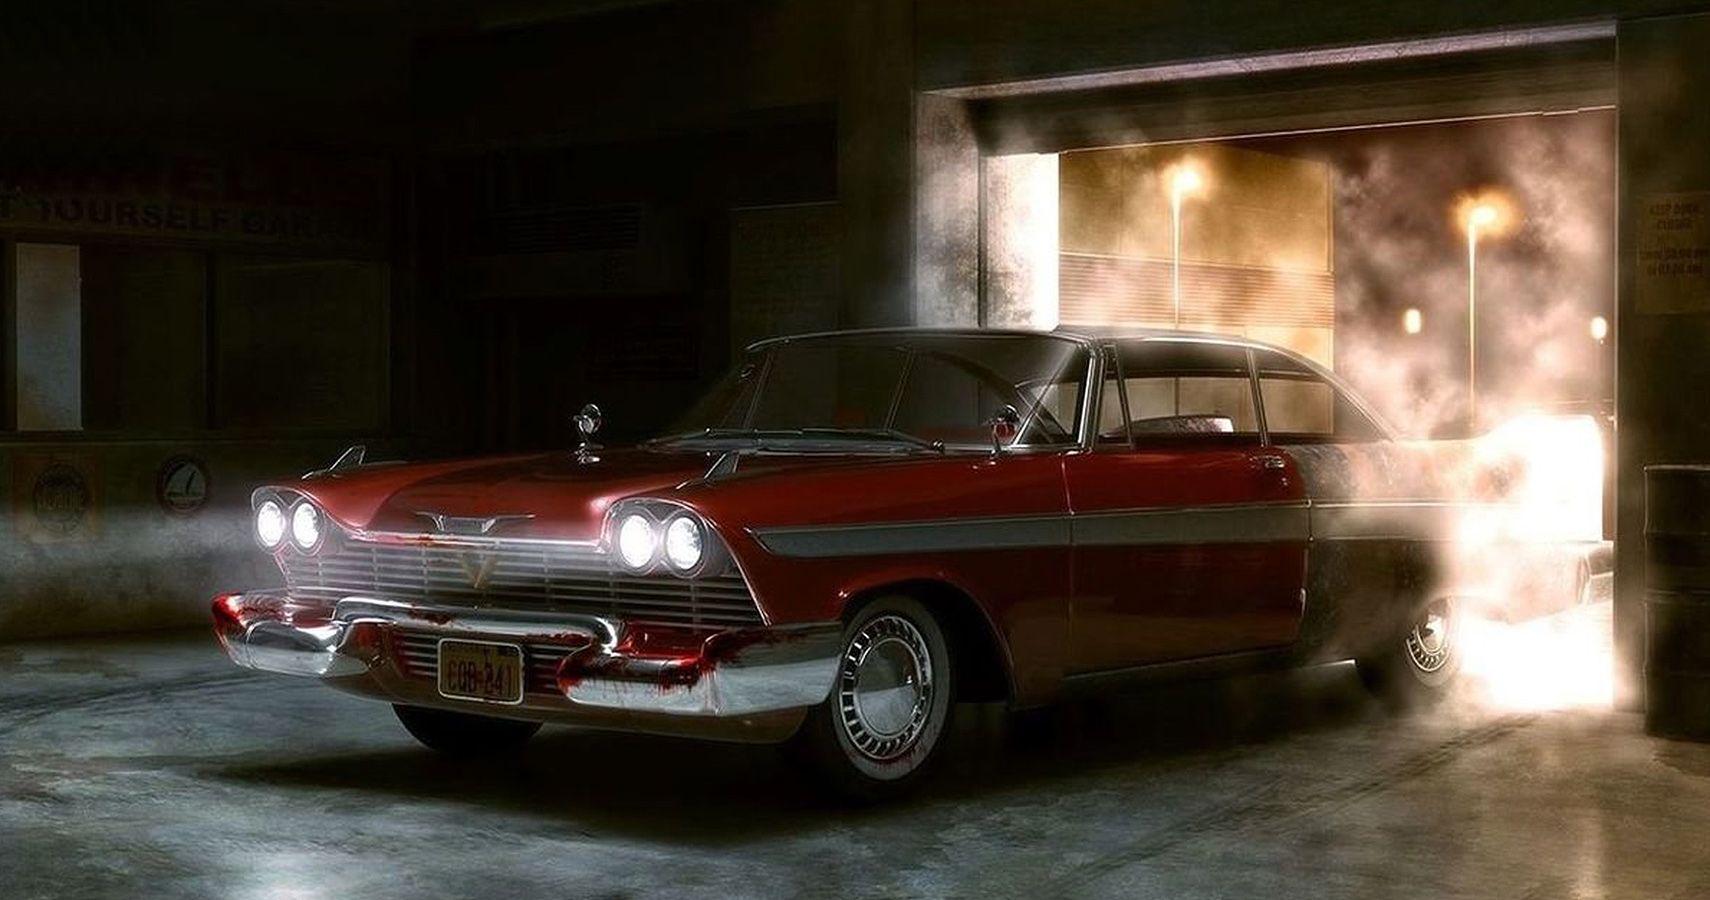 Here's What Happened To The Plymouth Fury From John Carpenter's Christine